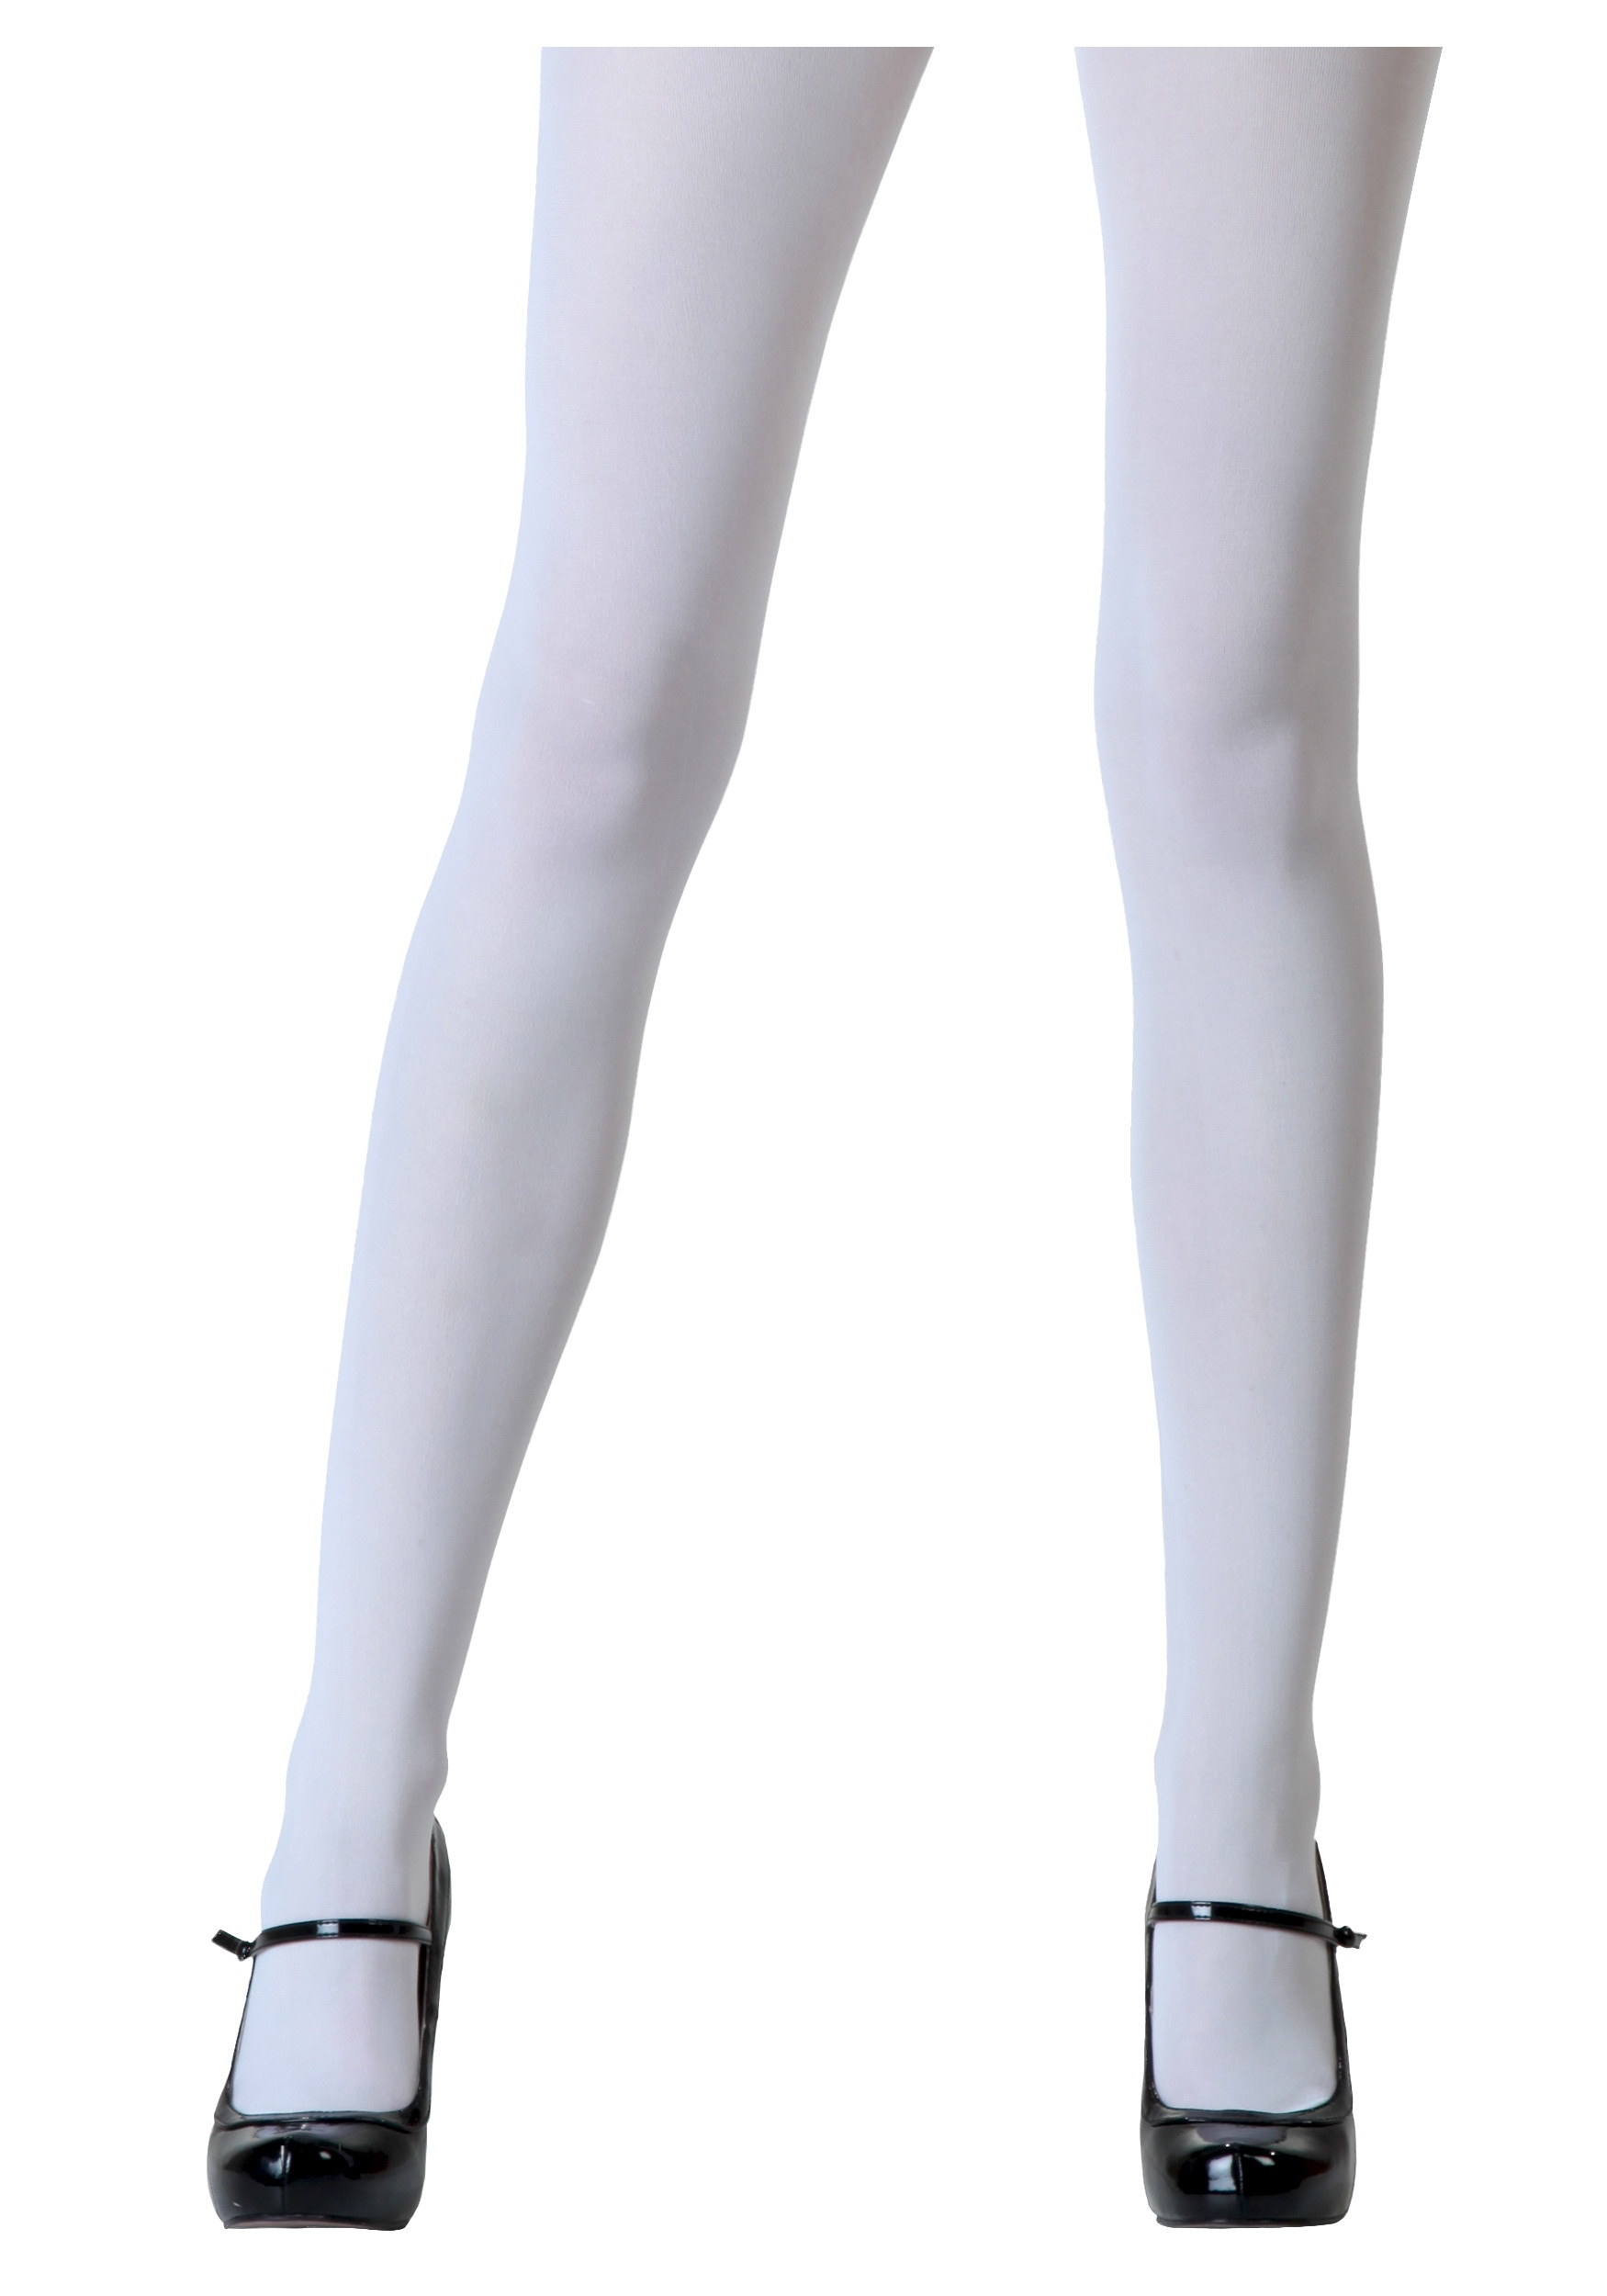 Meia Calça Branca  Tights outfit, White tights, Wool tights